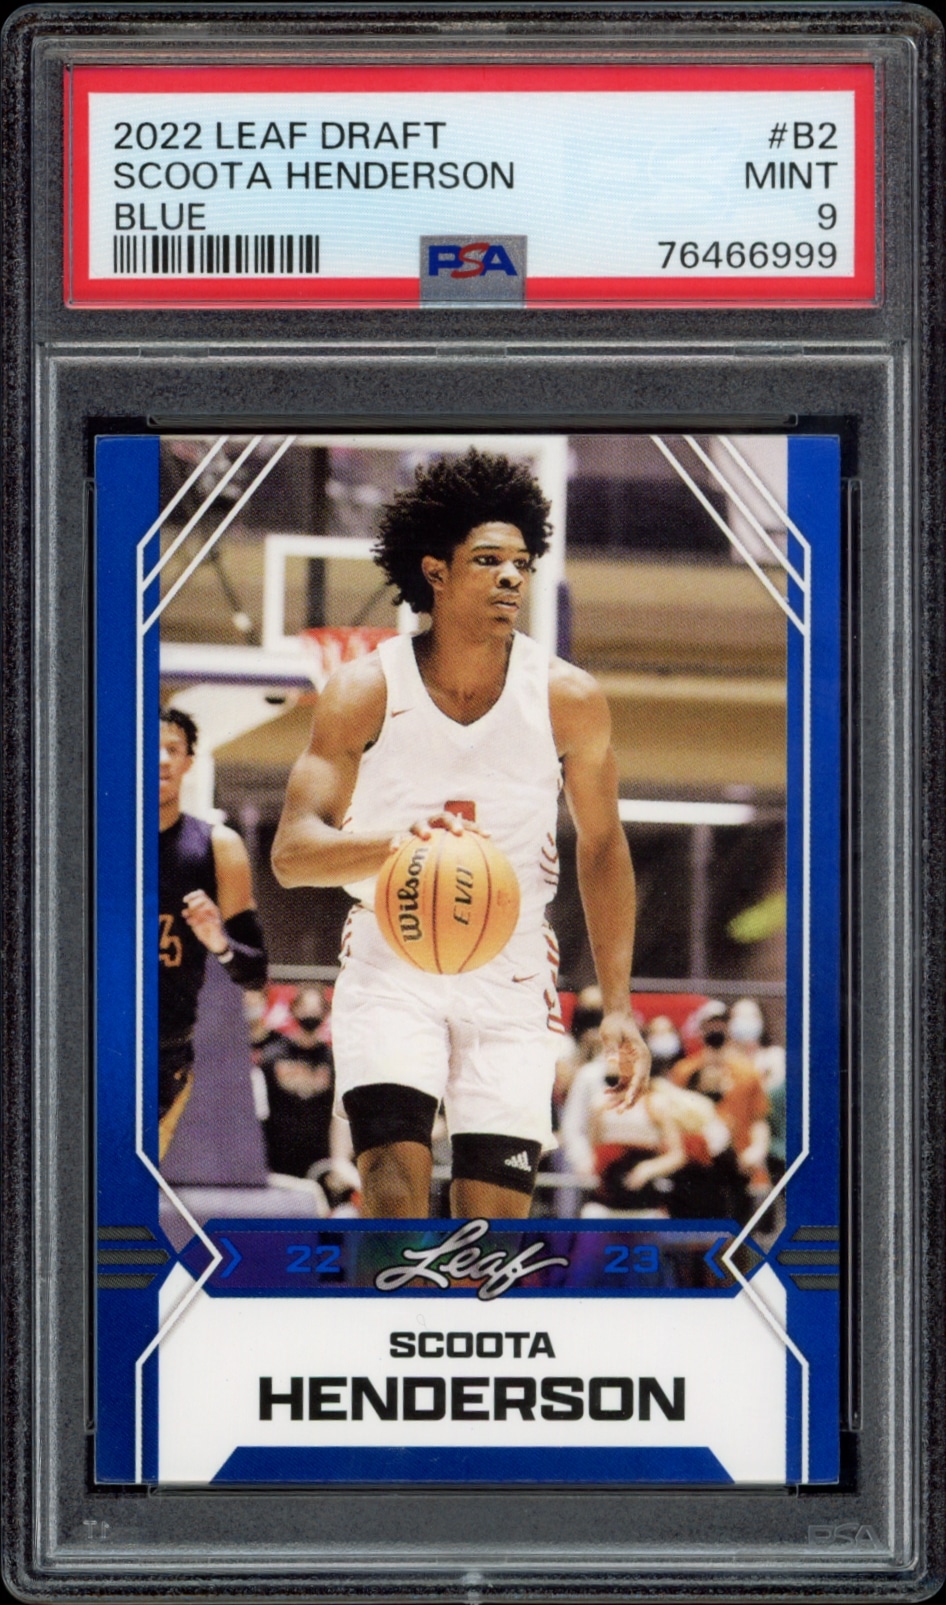 Mint 9 graded 2022 Leaf Draft card featuring basketball star Scoota Henderson in action.